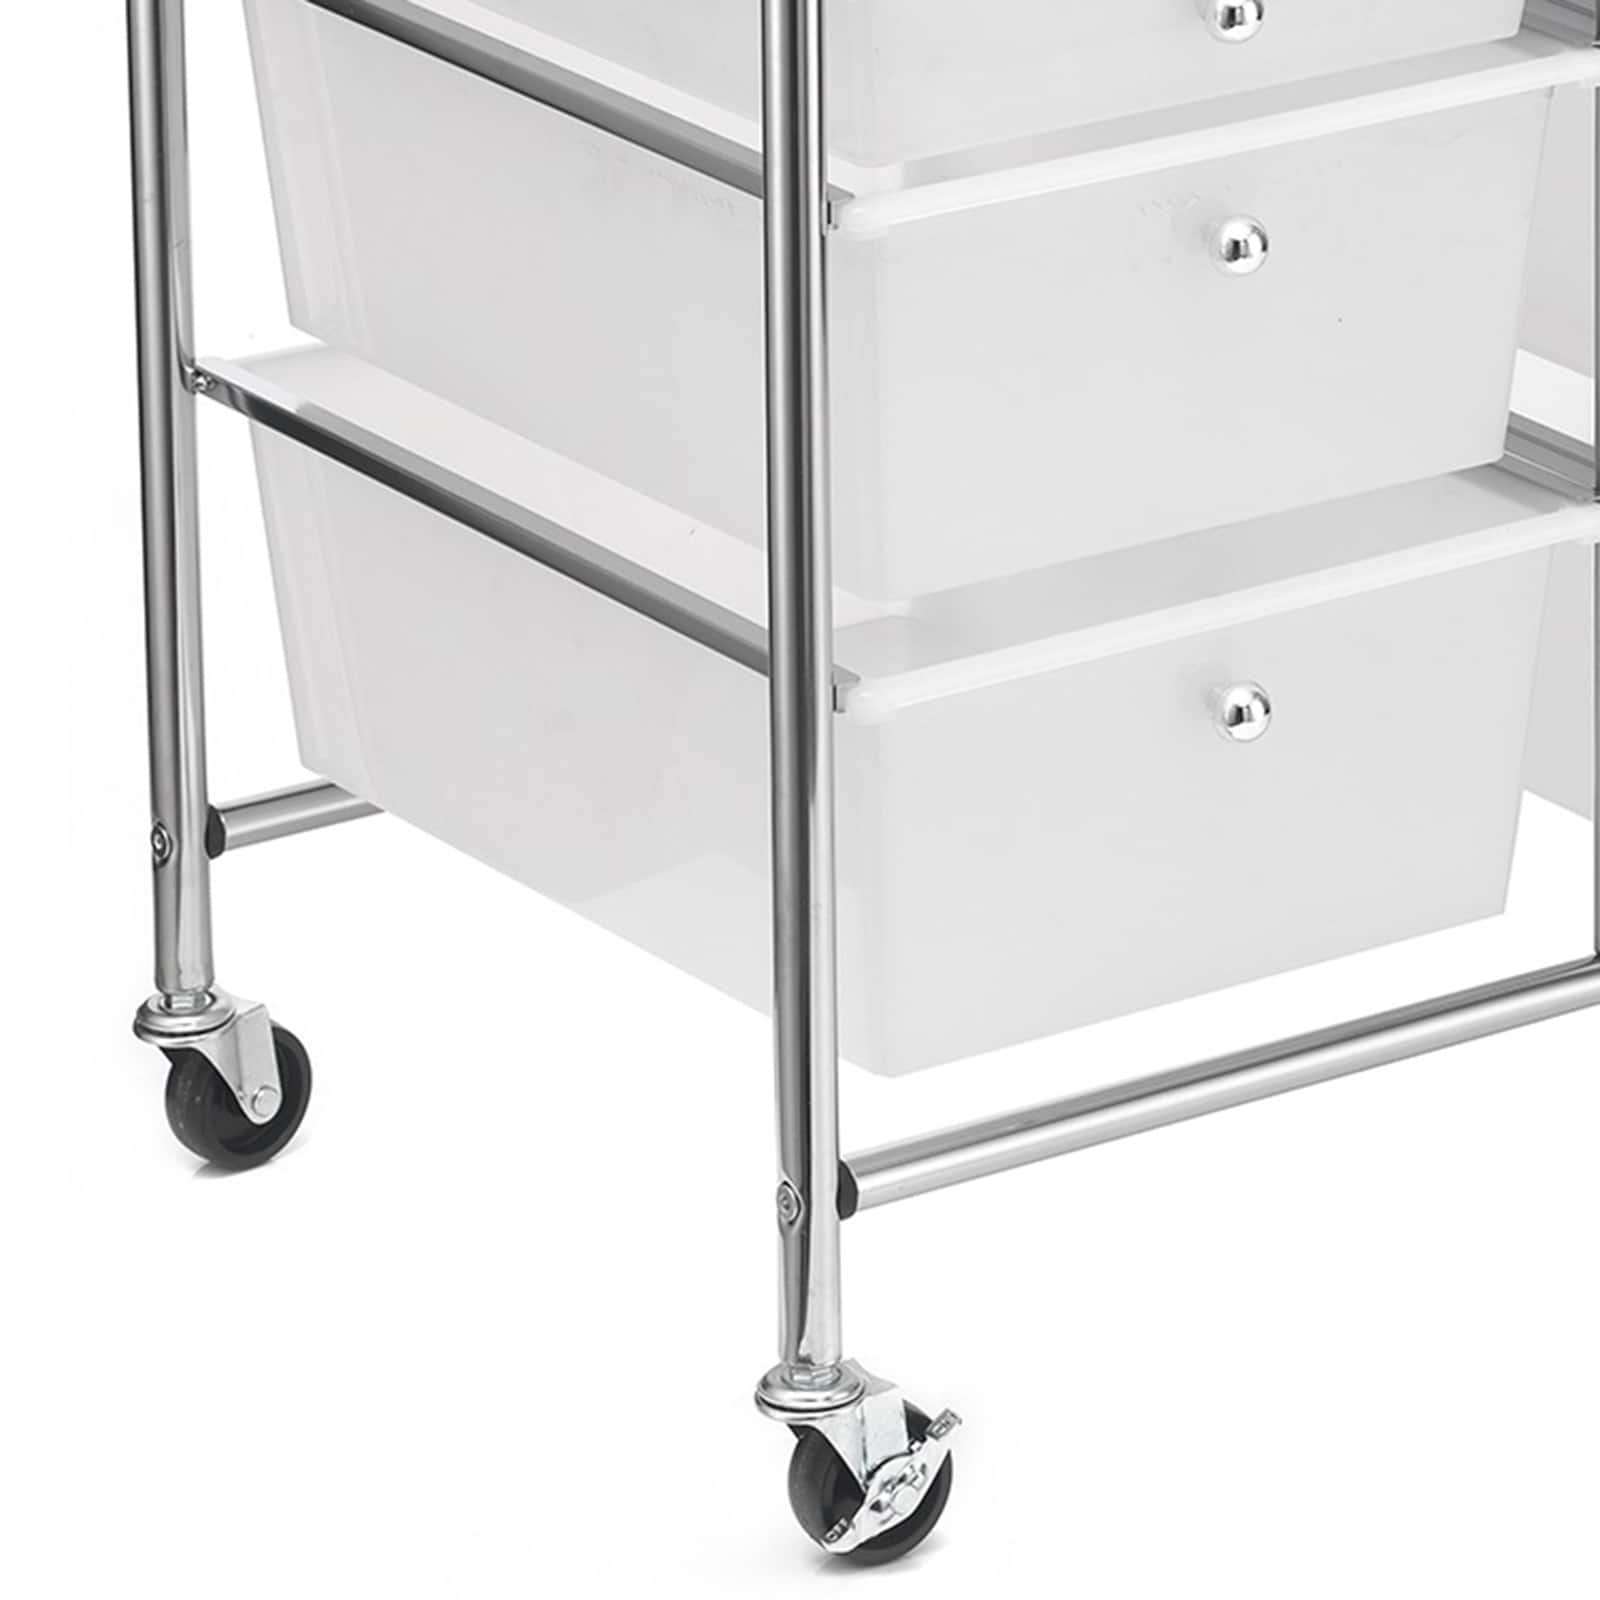 Fast Ship ! Details about   Multicolor 12 Drawer Rolling Cart by Simply Tidy 